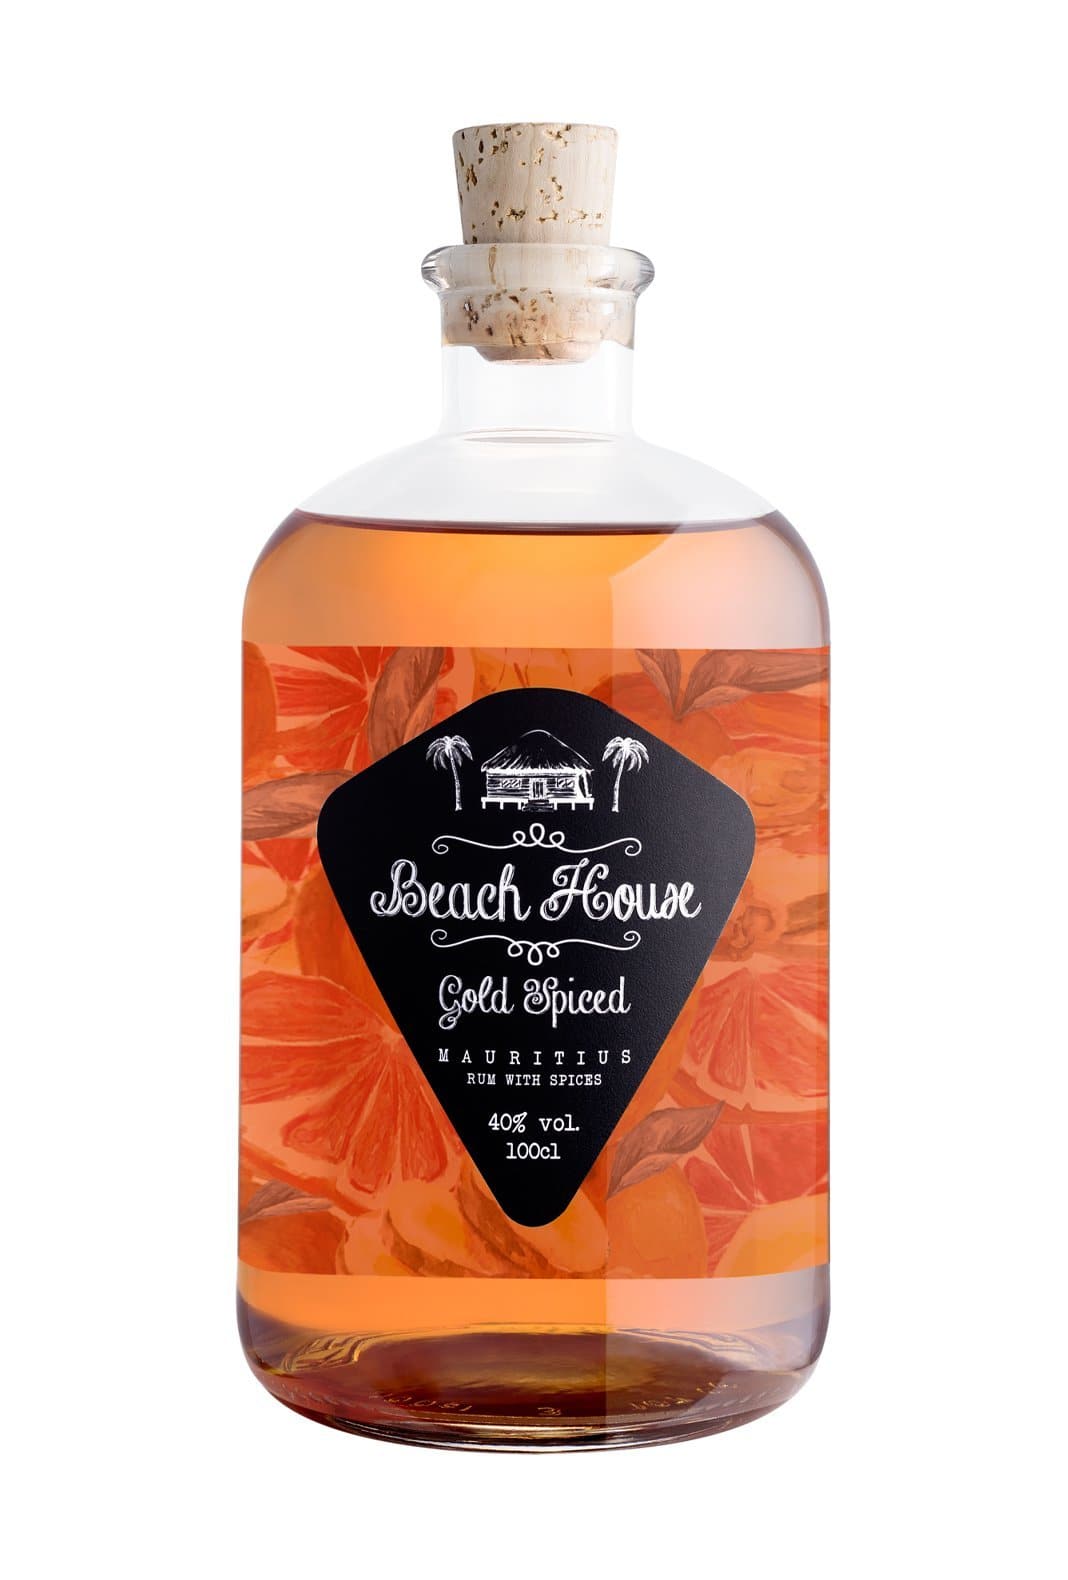 Beach House Gold Spiced Rum 40% 1000ml | Rum | Shop online at Spirits of France